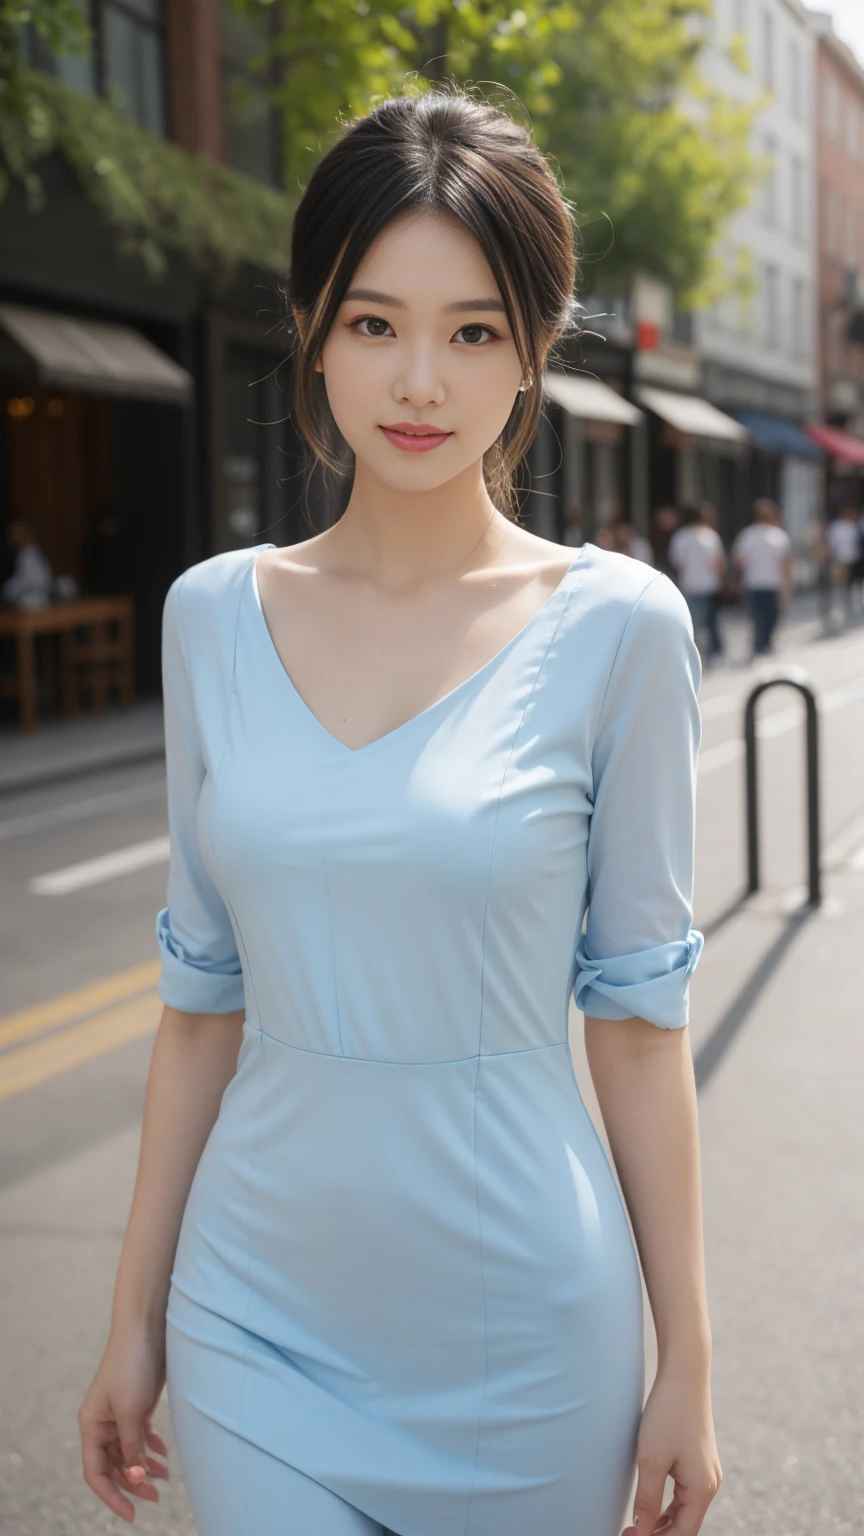 ((Best Quality, 8K, Masterpiece: 1.3)), Fat Body Beauty: 1.4, 30 years old, mature, Bust fullness: 1.6, Thigh Volume: 1.6, Highly detailed face and skin texture, Delicate eyes, Double eyelids, Chubby face, thin lips, smile, fair skin, (dress: 1.6), Standing posture, city street background